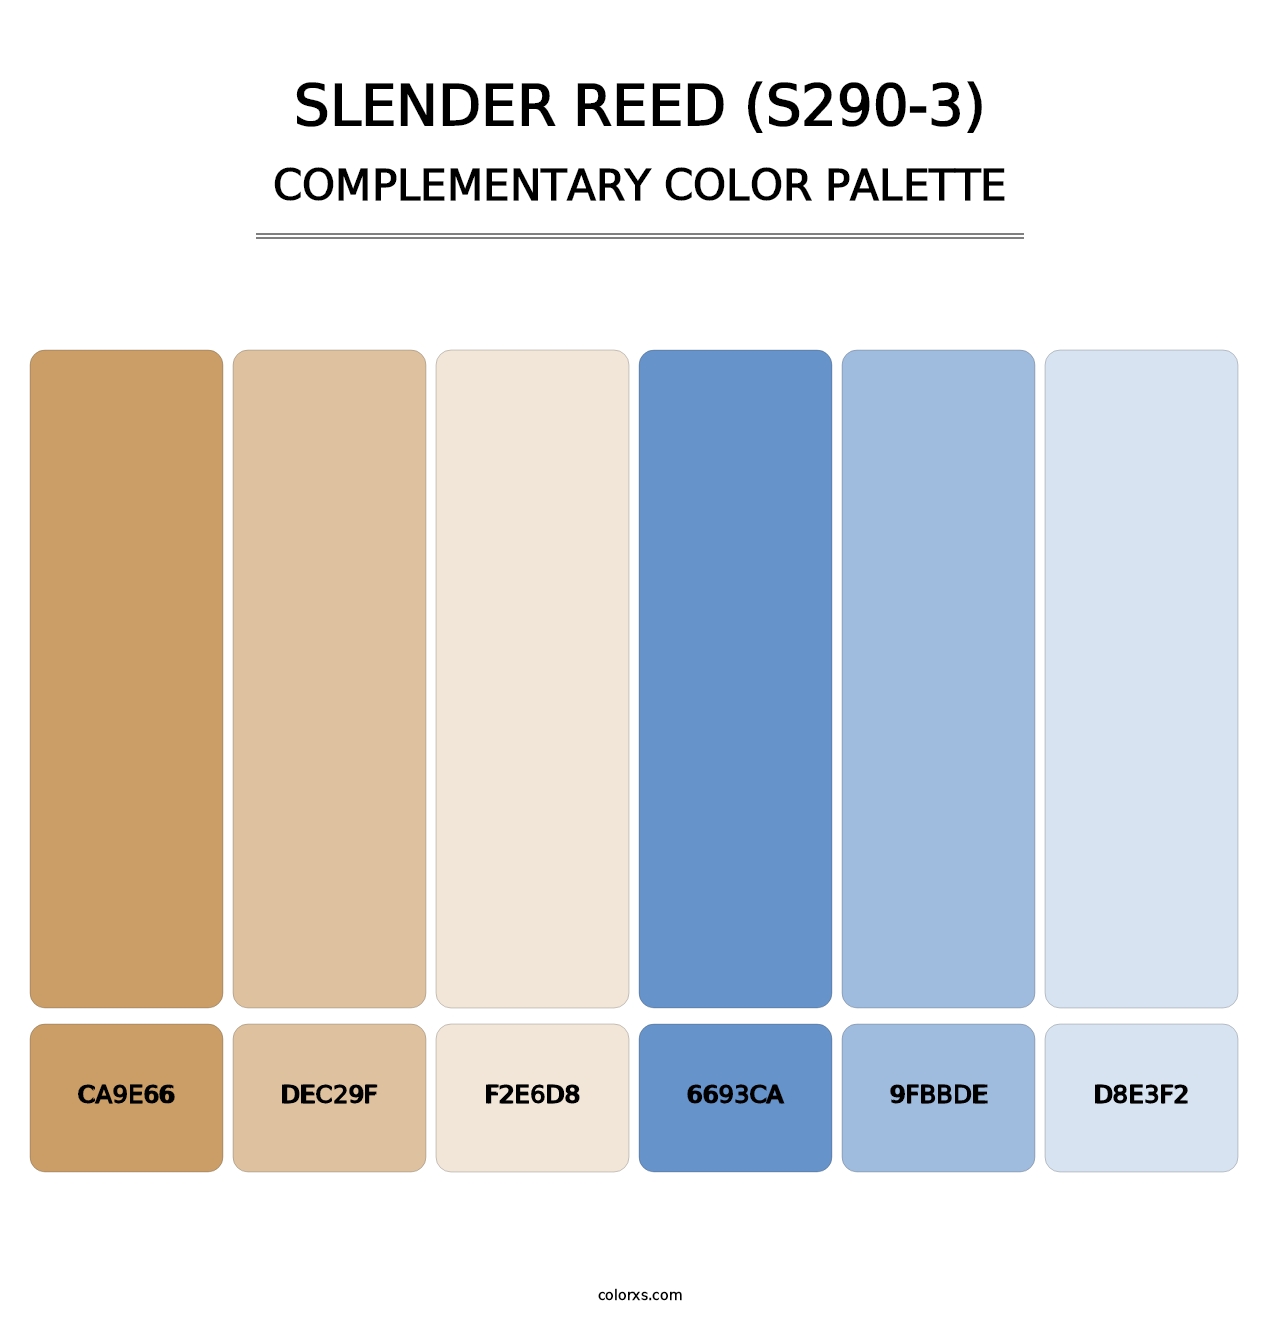 Slender Reed (S290-3) - Complementary Color Palette